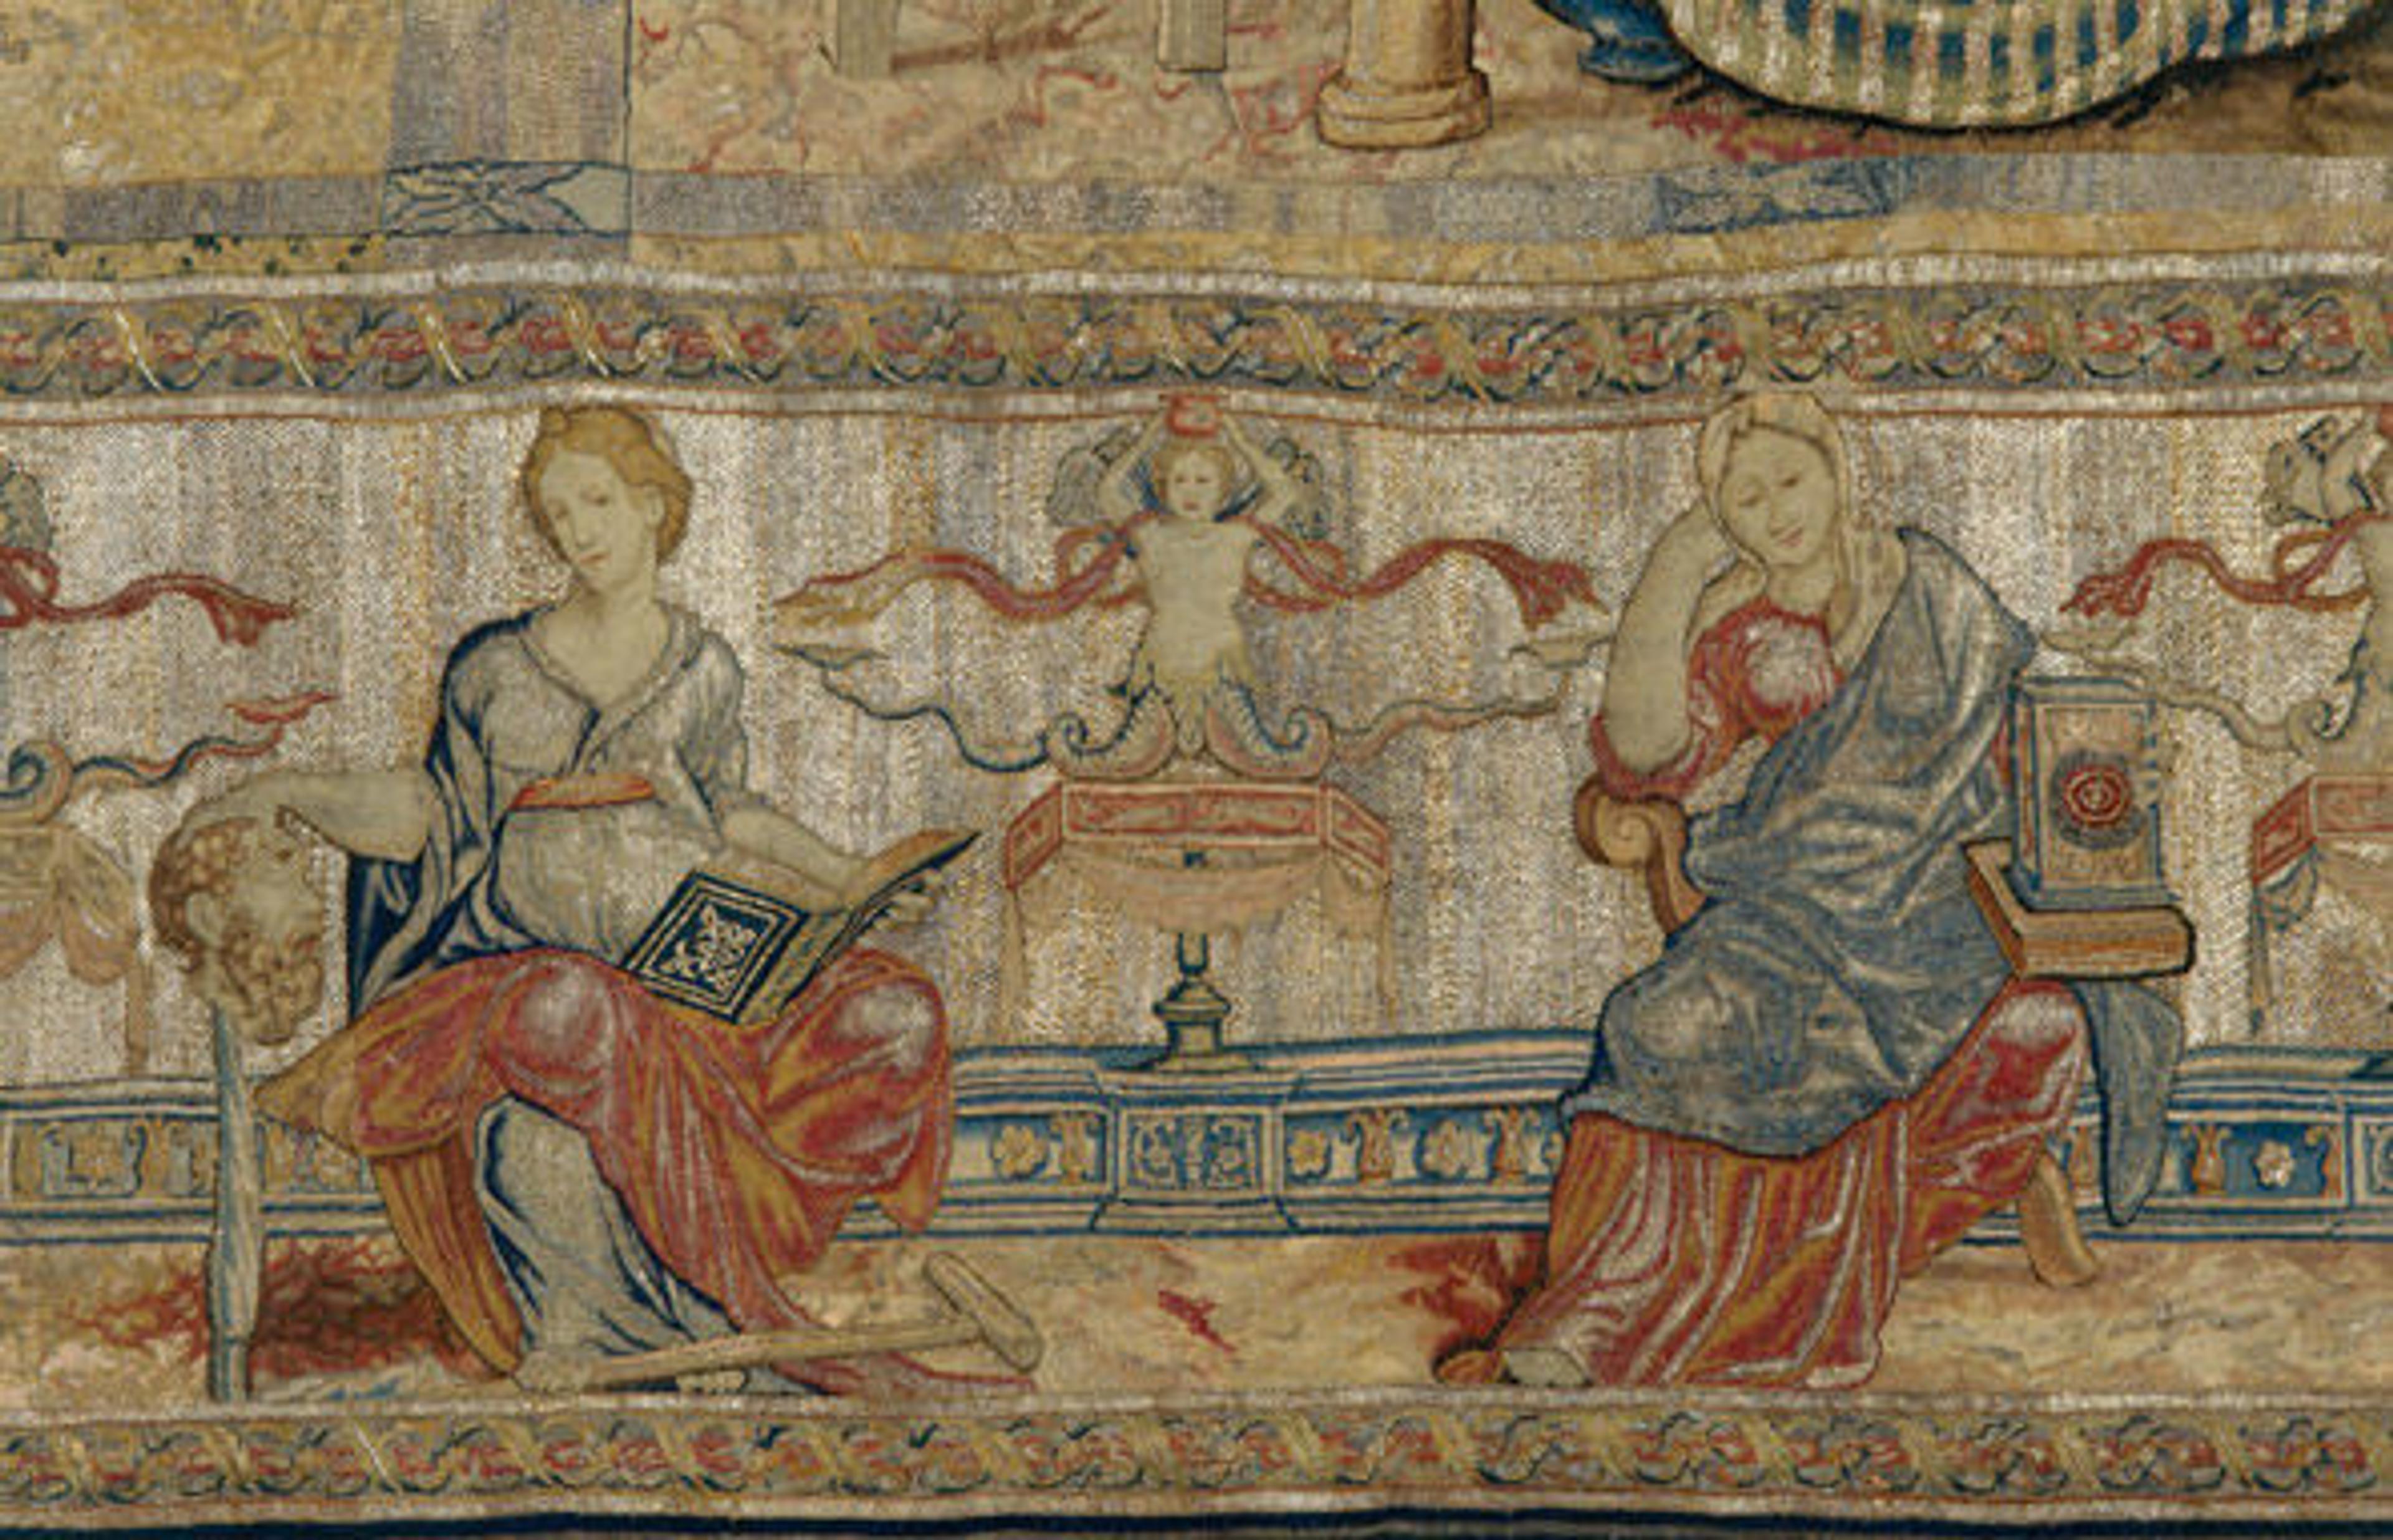 The Bridal Chamber of Herse, from a set of eight tapestries depicting the Story of Mercury and Herse (detail), ca. 1550.